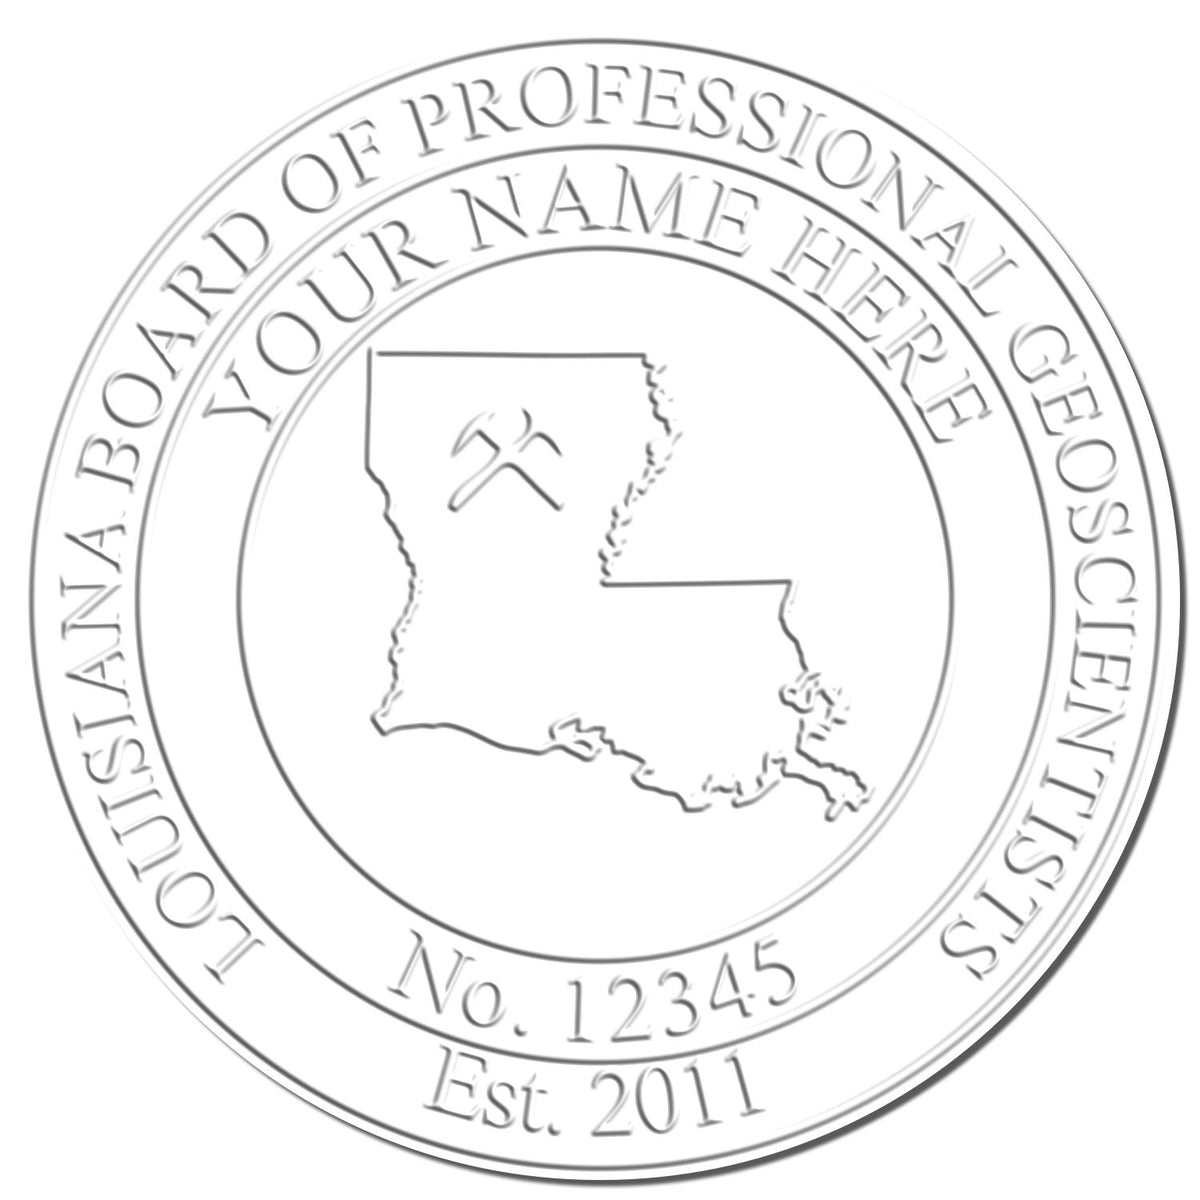 A stamped imprint of the Soft Louisiana Professional Geologist Seal in this stylish lifestyle photo, setting the tone for a unique and personalized product.